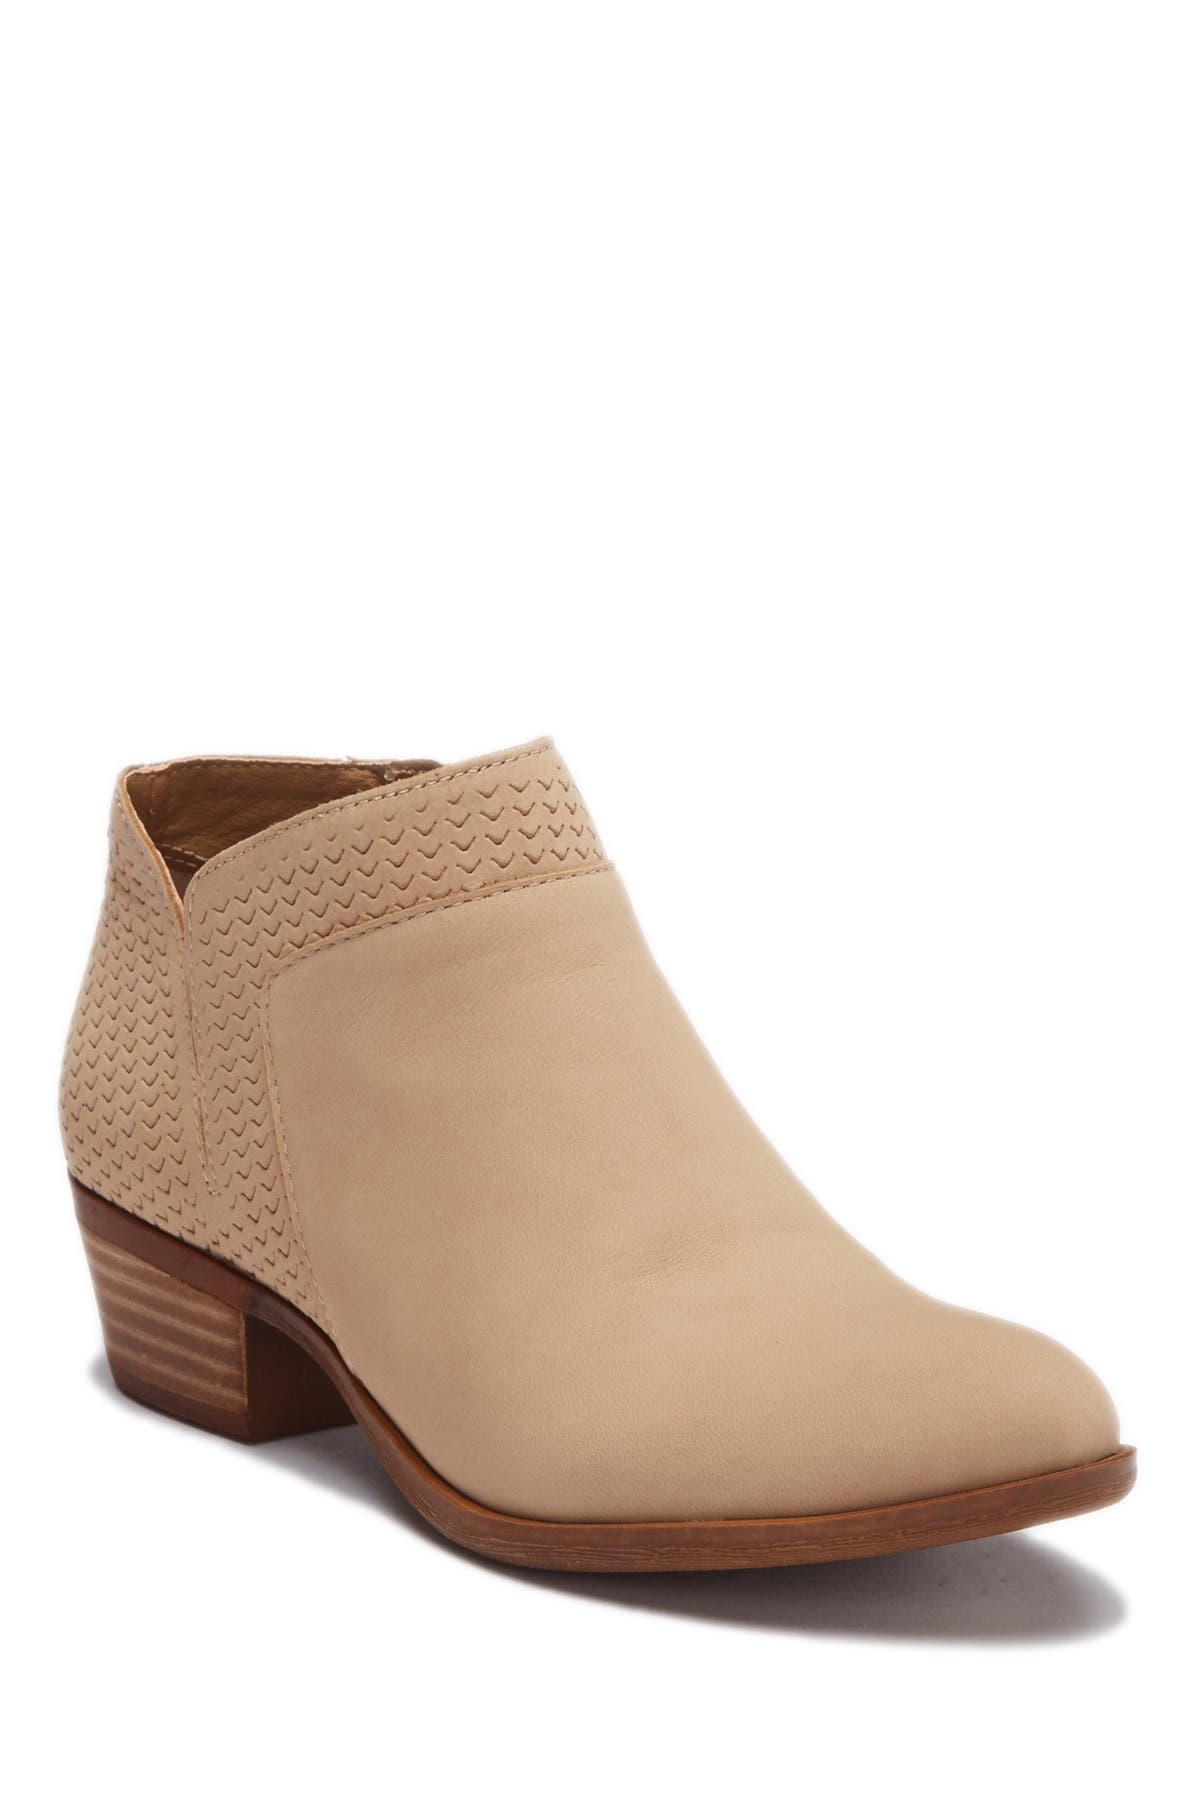 lucky brand brintly leather ankle bootie